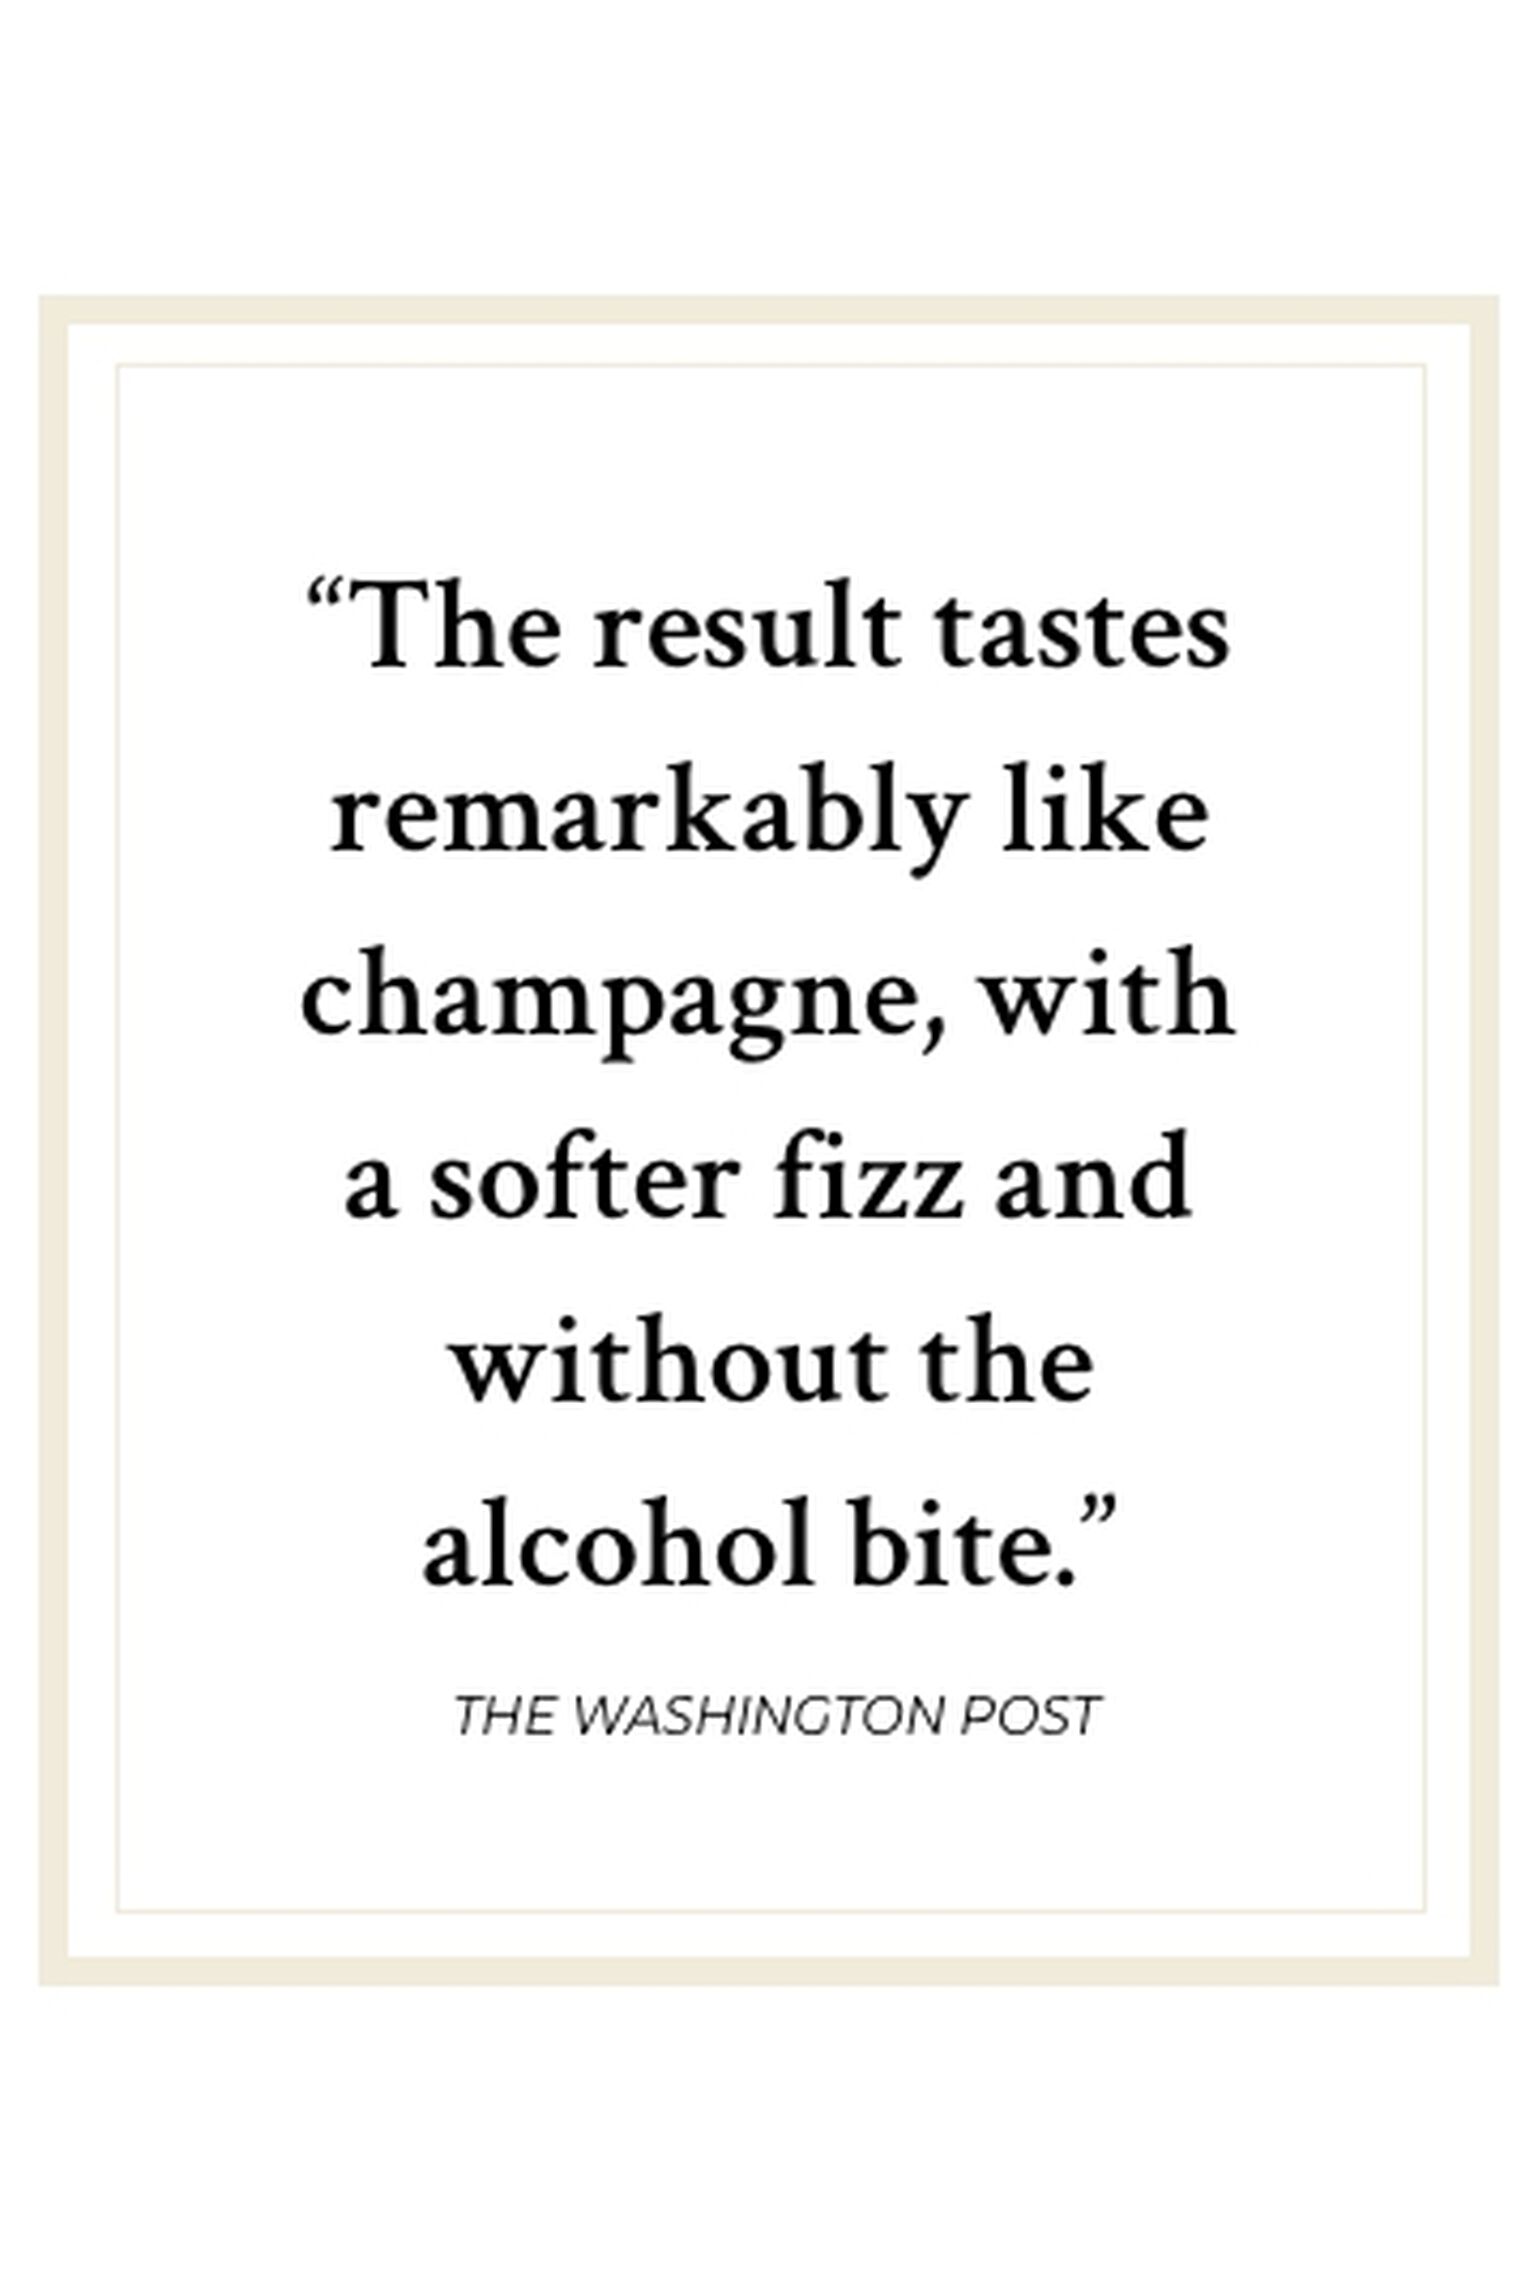 Quote: The result tastes remarkably like champagne, with a softer fizz and without the alcohol bite.